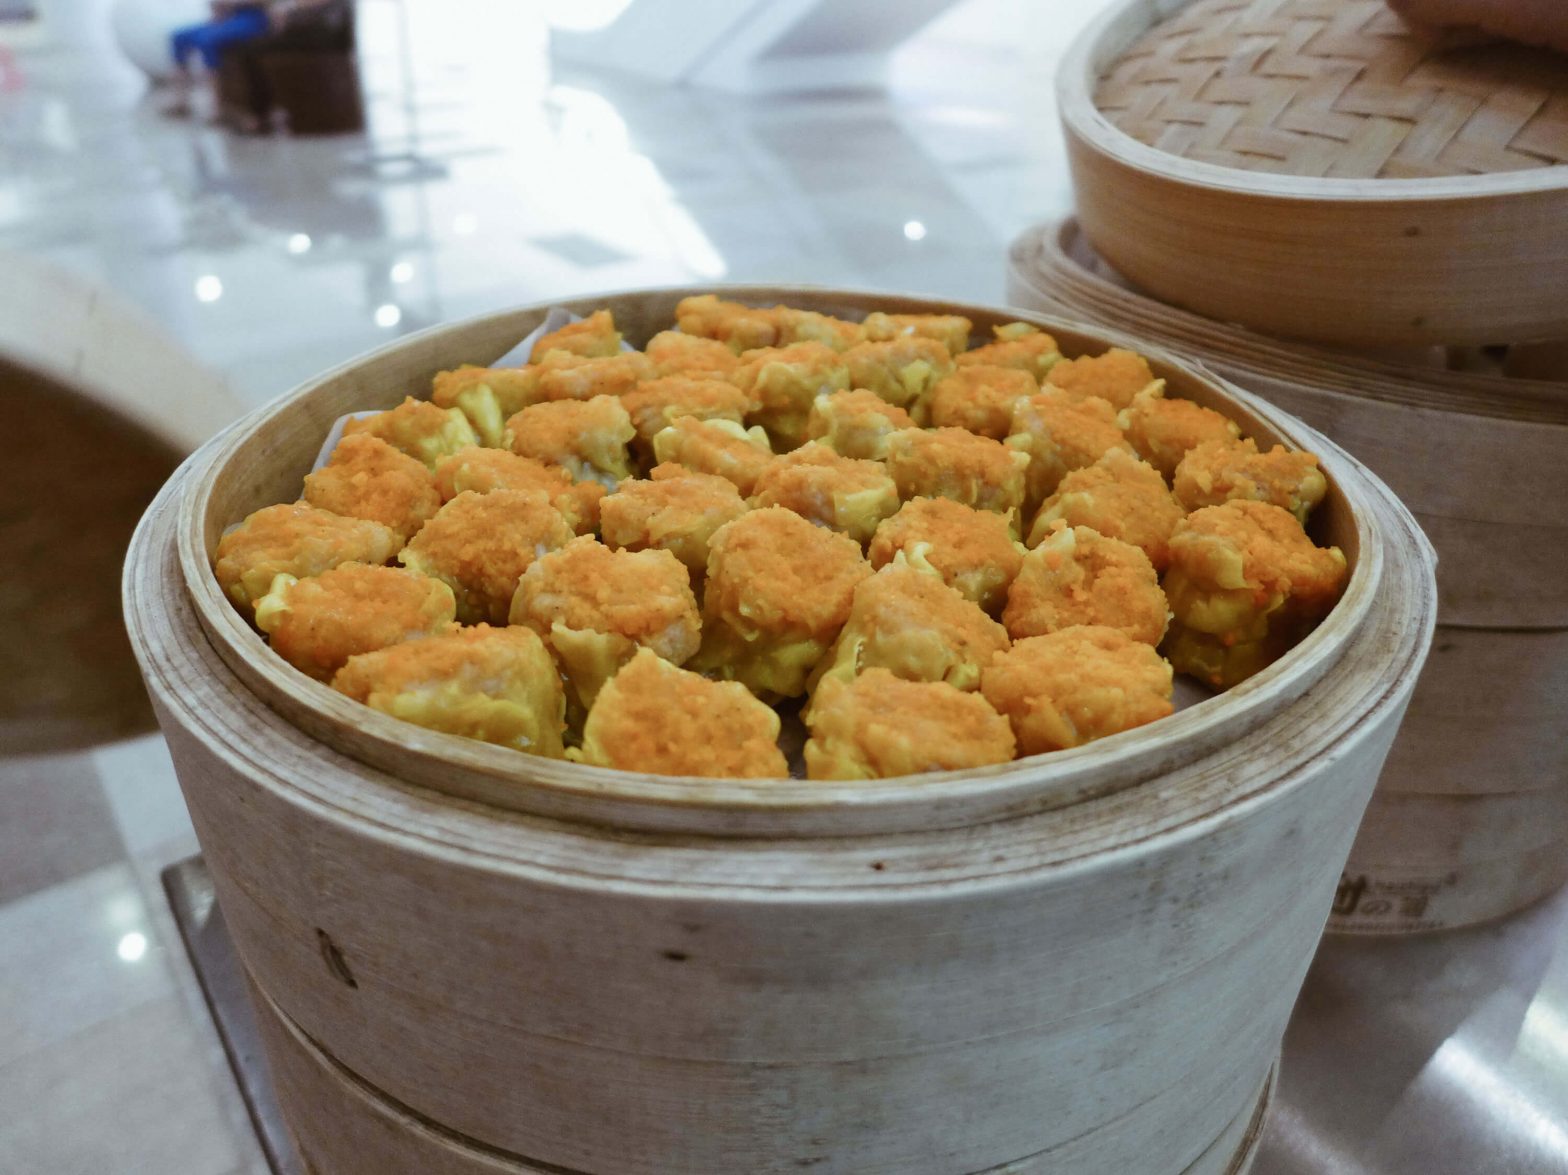 Harbour City Group marks 50 years of great dimsum